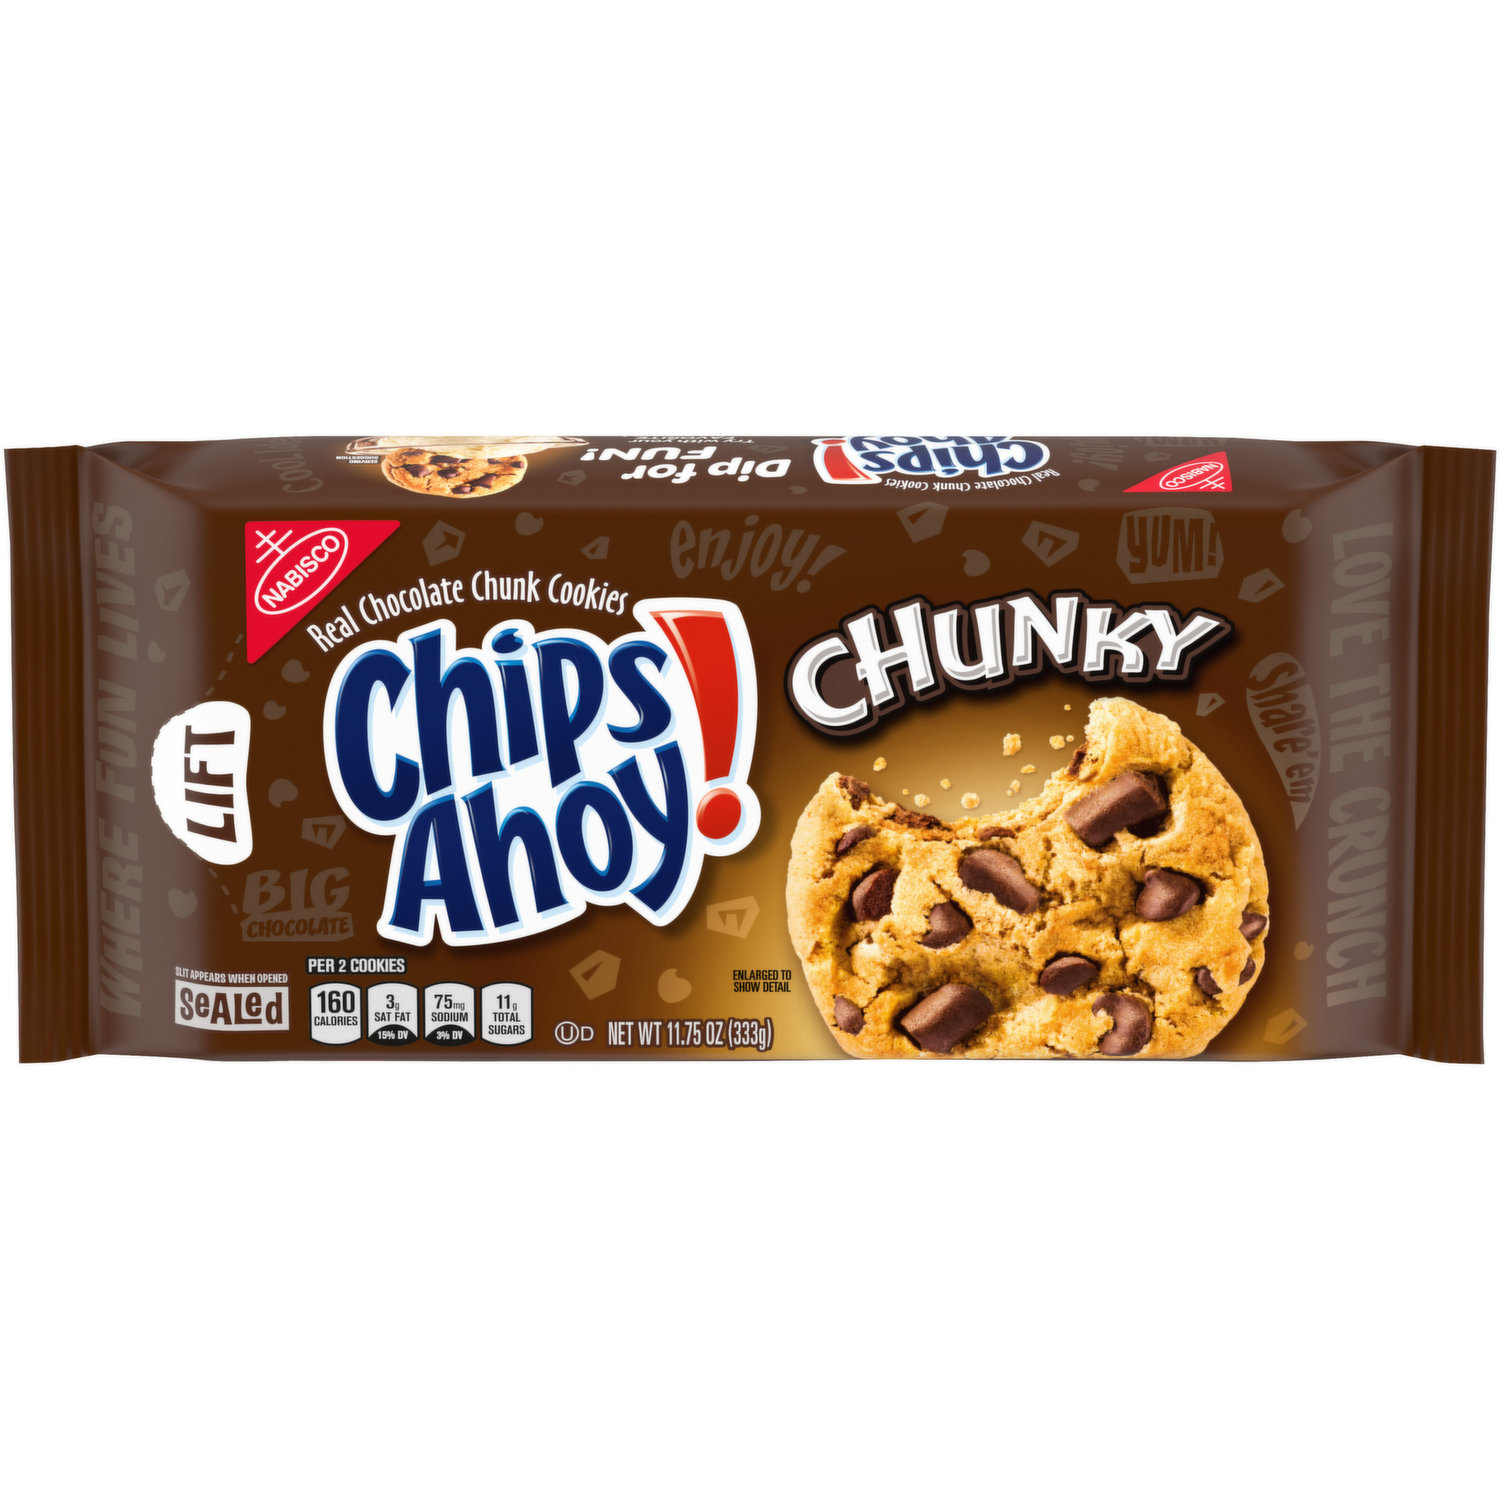 Chips Ahoy! Cookies, Peanut Butter Cups, Family Size! 14.25 Oz